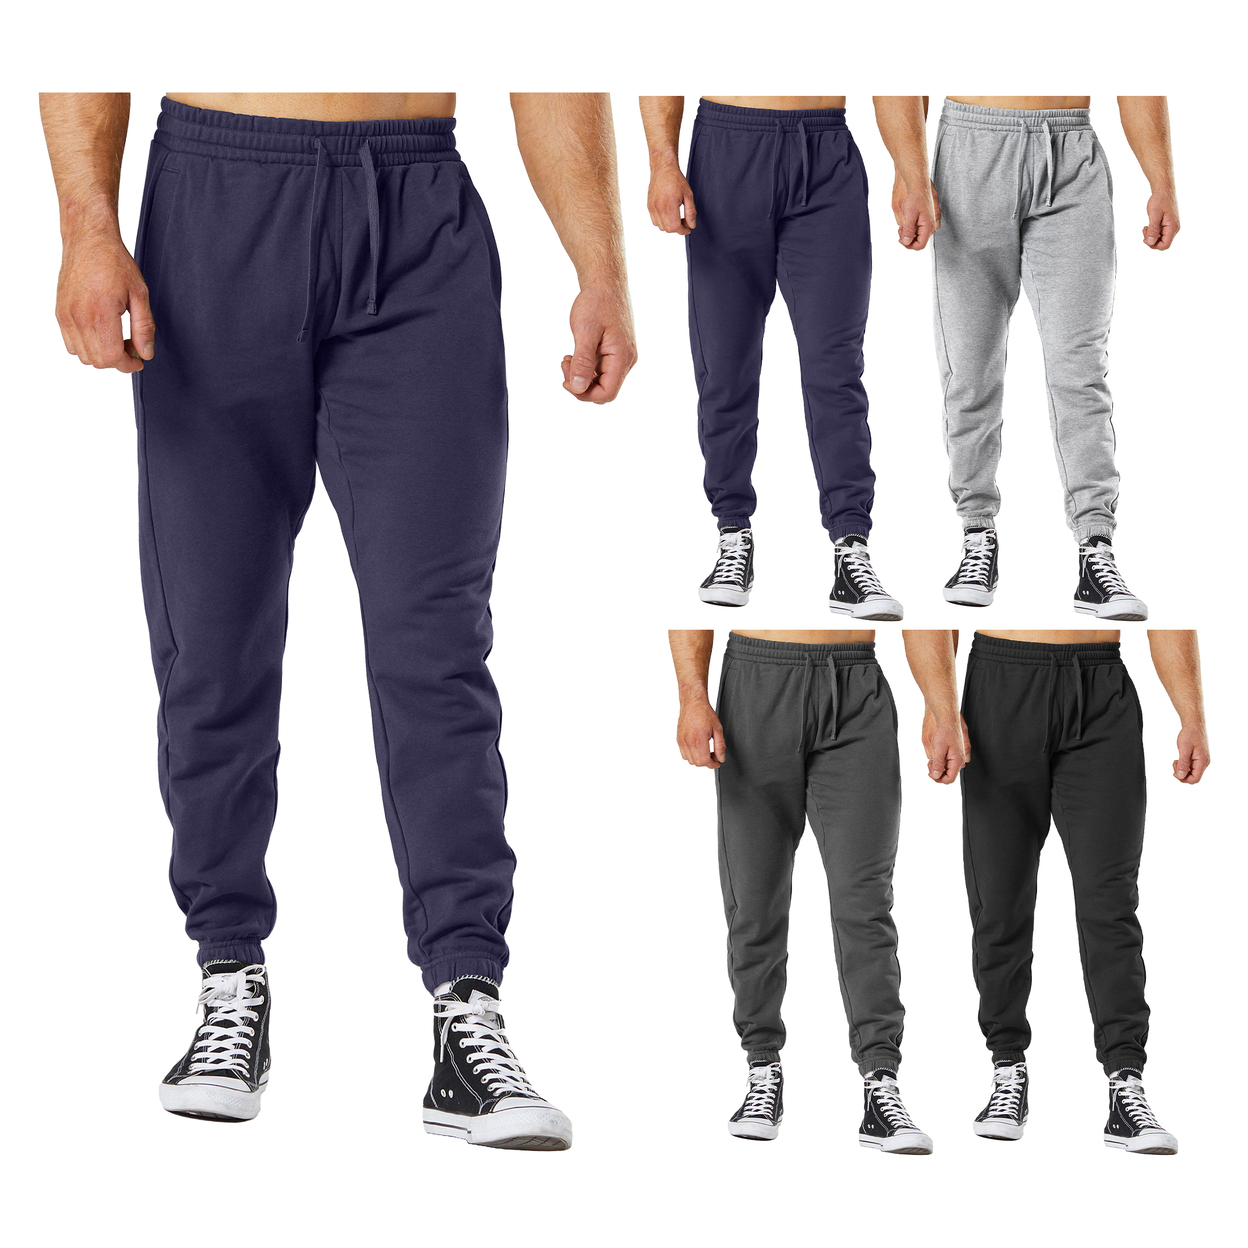 Multi-Pack: Men's Ultra-Soft Cozy Winter Warm Casual Fleece-Lined Sweatpants Jogger - 3-pack, Large